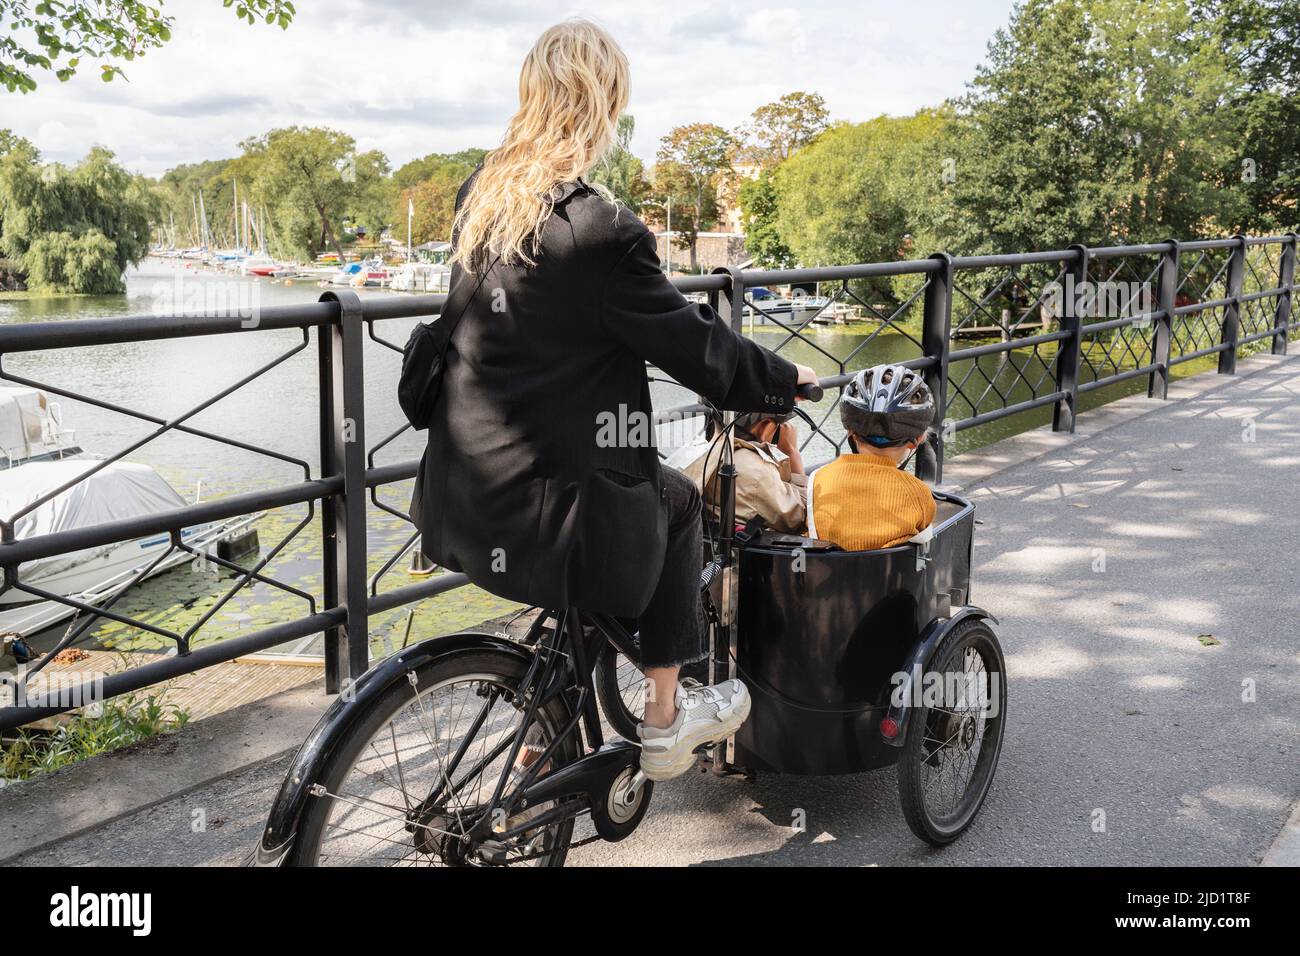 Mother riding bicycle with children in carriage Stock Photo